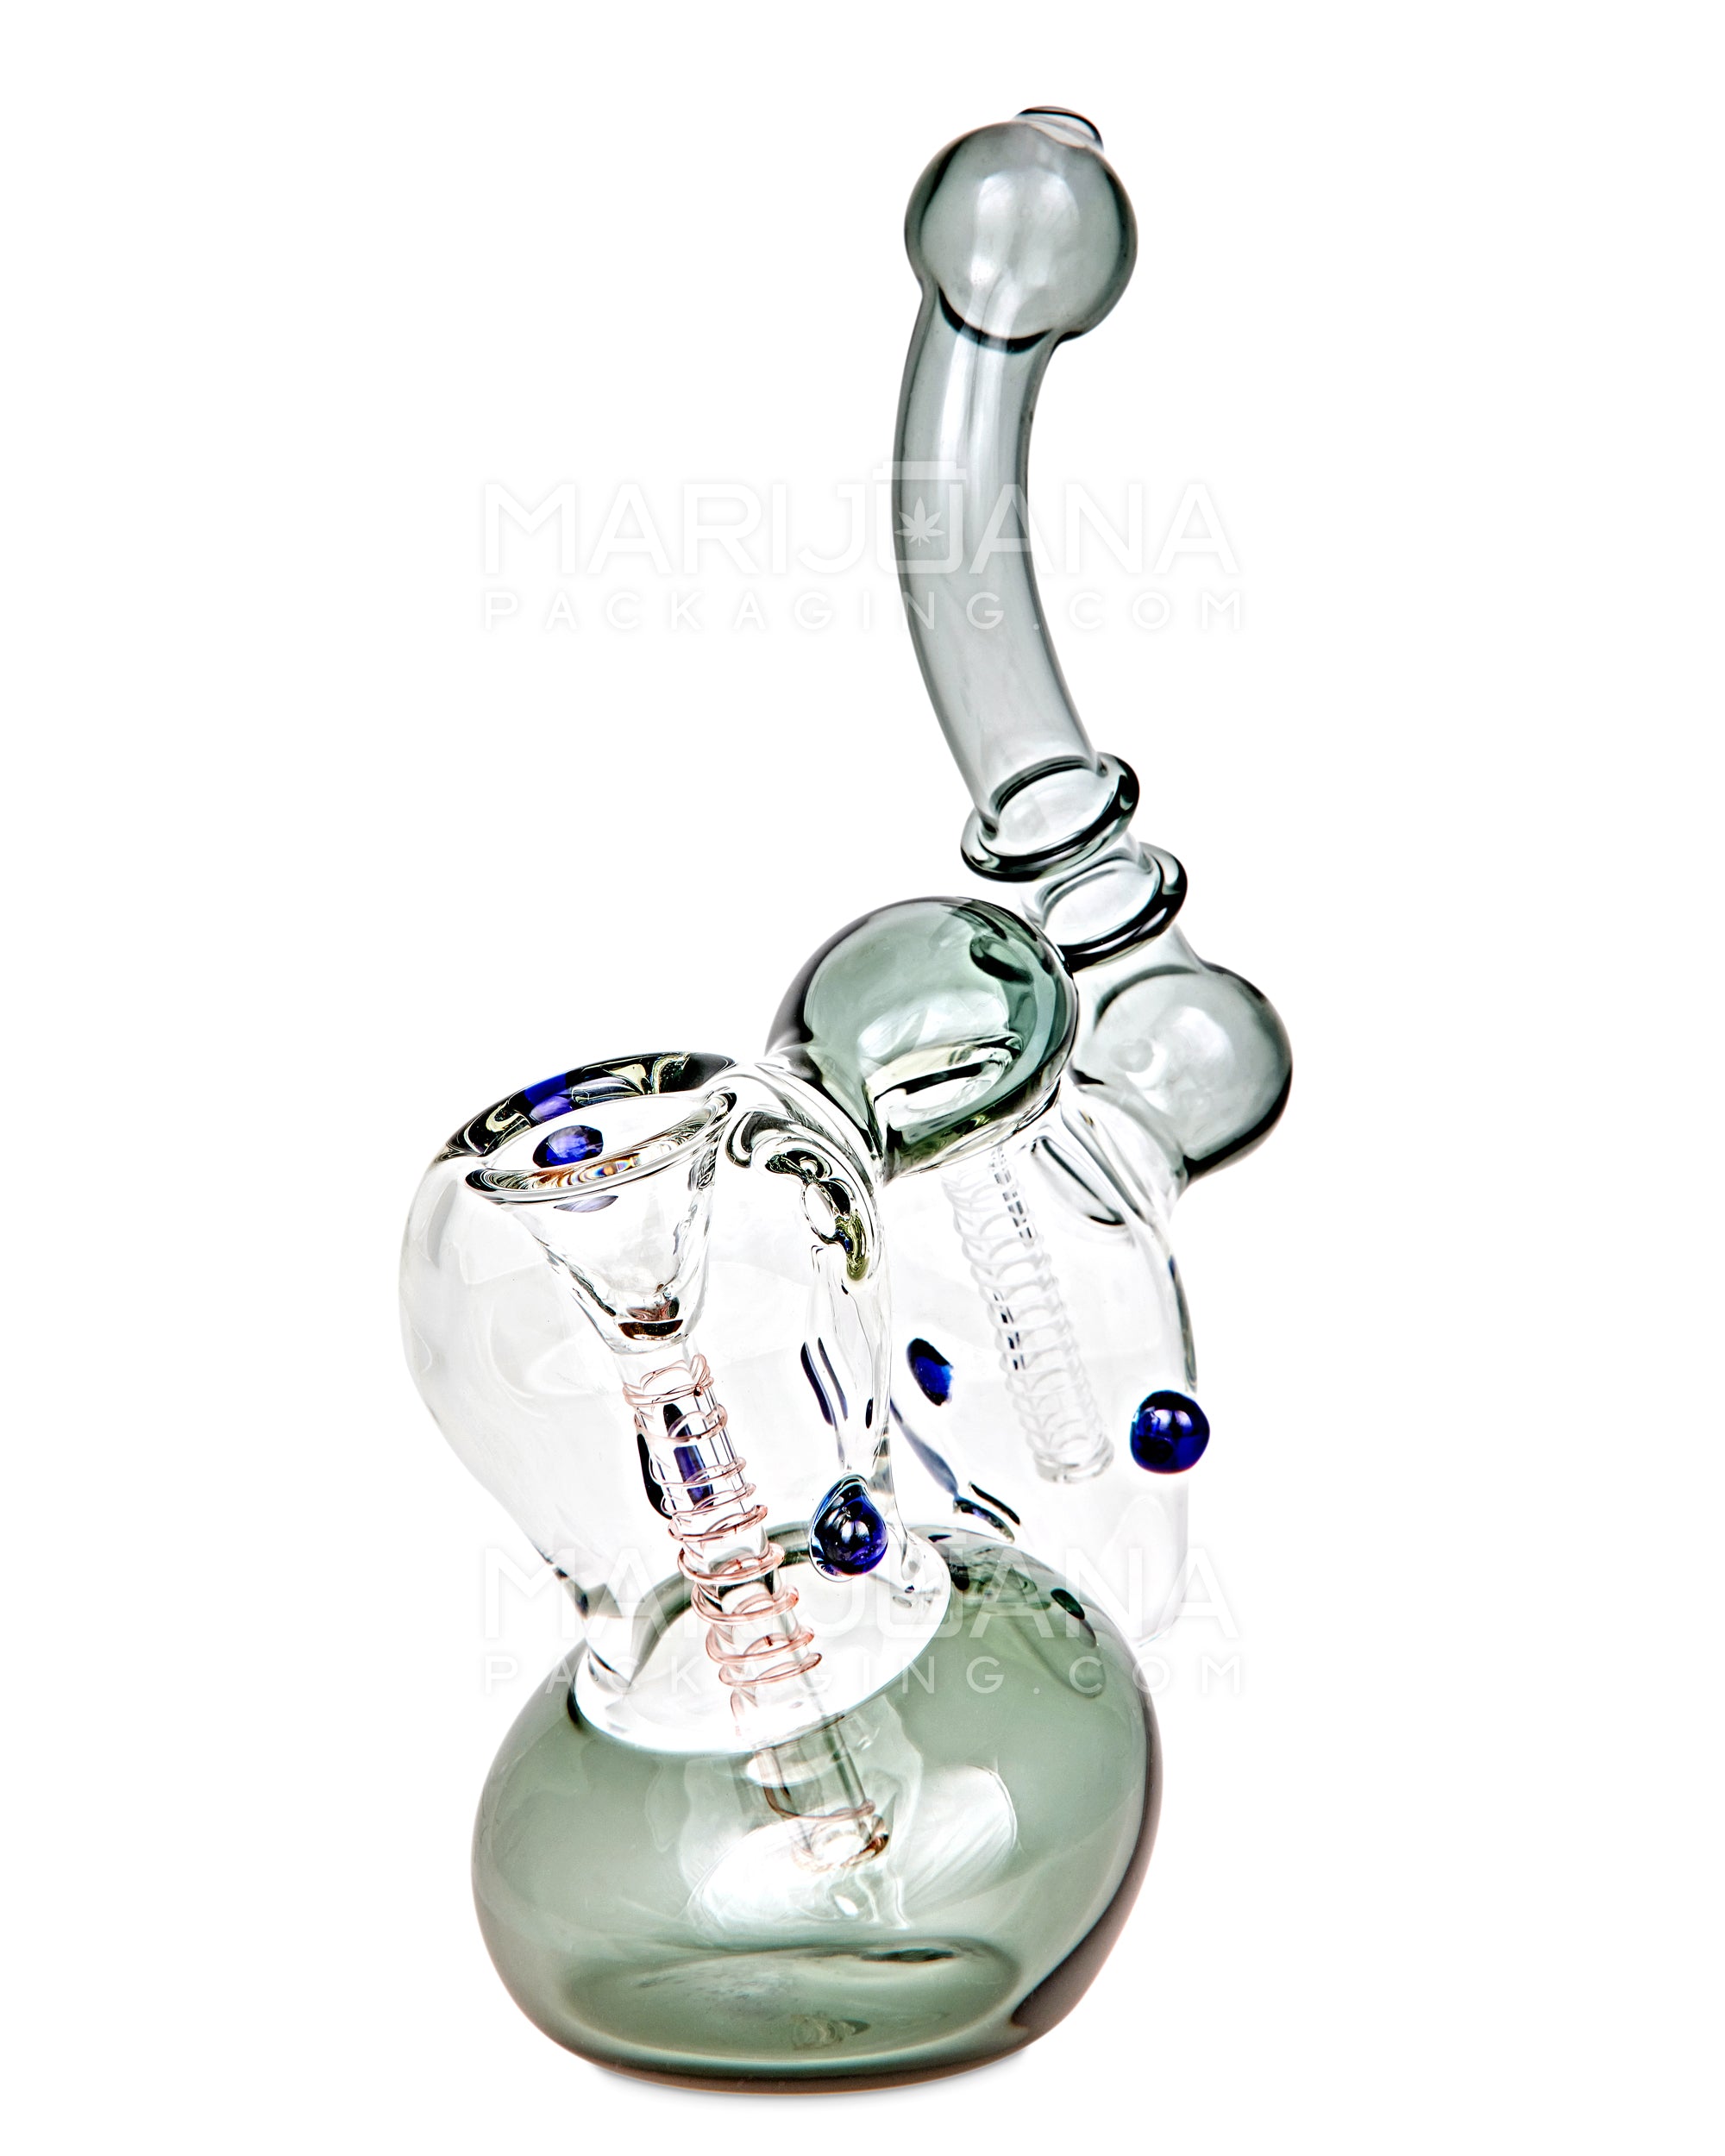 Ringed Double Chamber Bubbler w/ Multi Knockers | 7.5in Tall - Glass - Smoke - 2